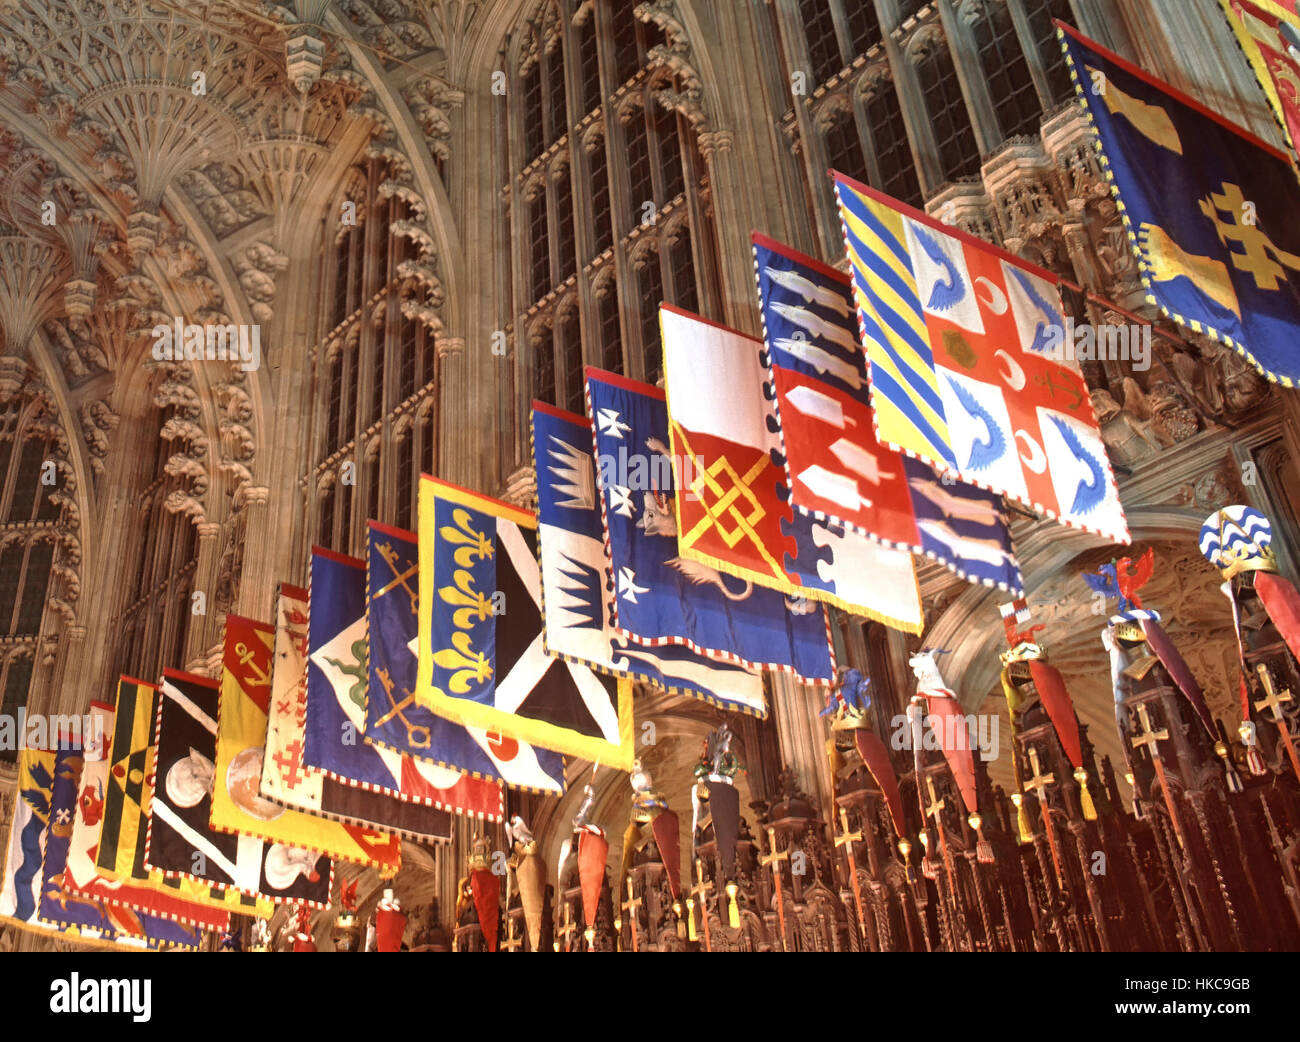 Westminster Abbey church of England interior Henry Vii Lady Chapel & heraldic banners coat of arms of knights of the Order of Bath London England UK Stock Photo